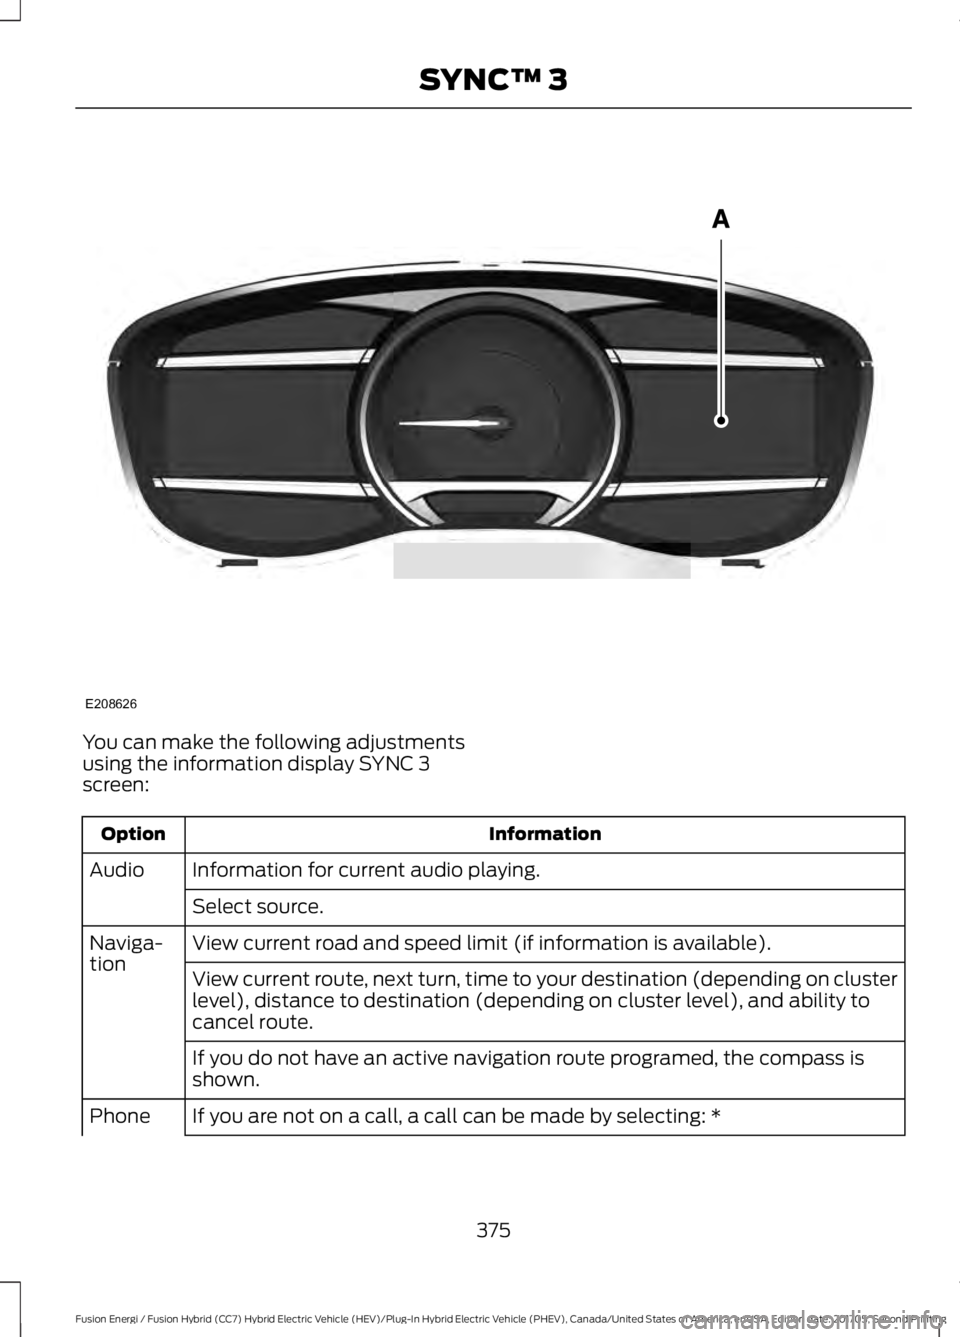 FORD FUSION ENERGI 2018  Owners Manual You can make the following adjustmentsusing the information display SYNC 3screen:
InformationOption
Information for current audio playing.Audio
Select source.
View current road and speed limit (if inf